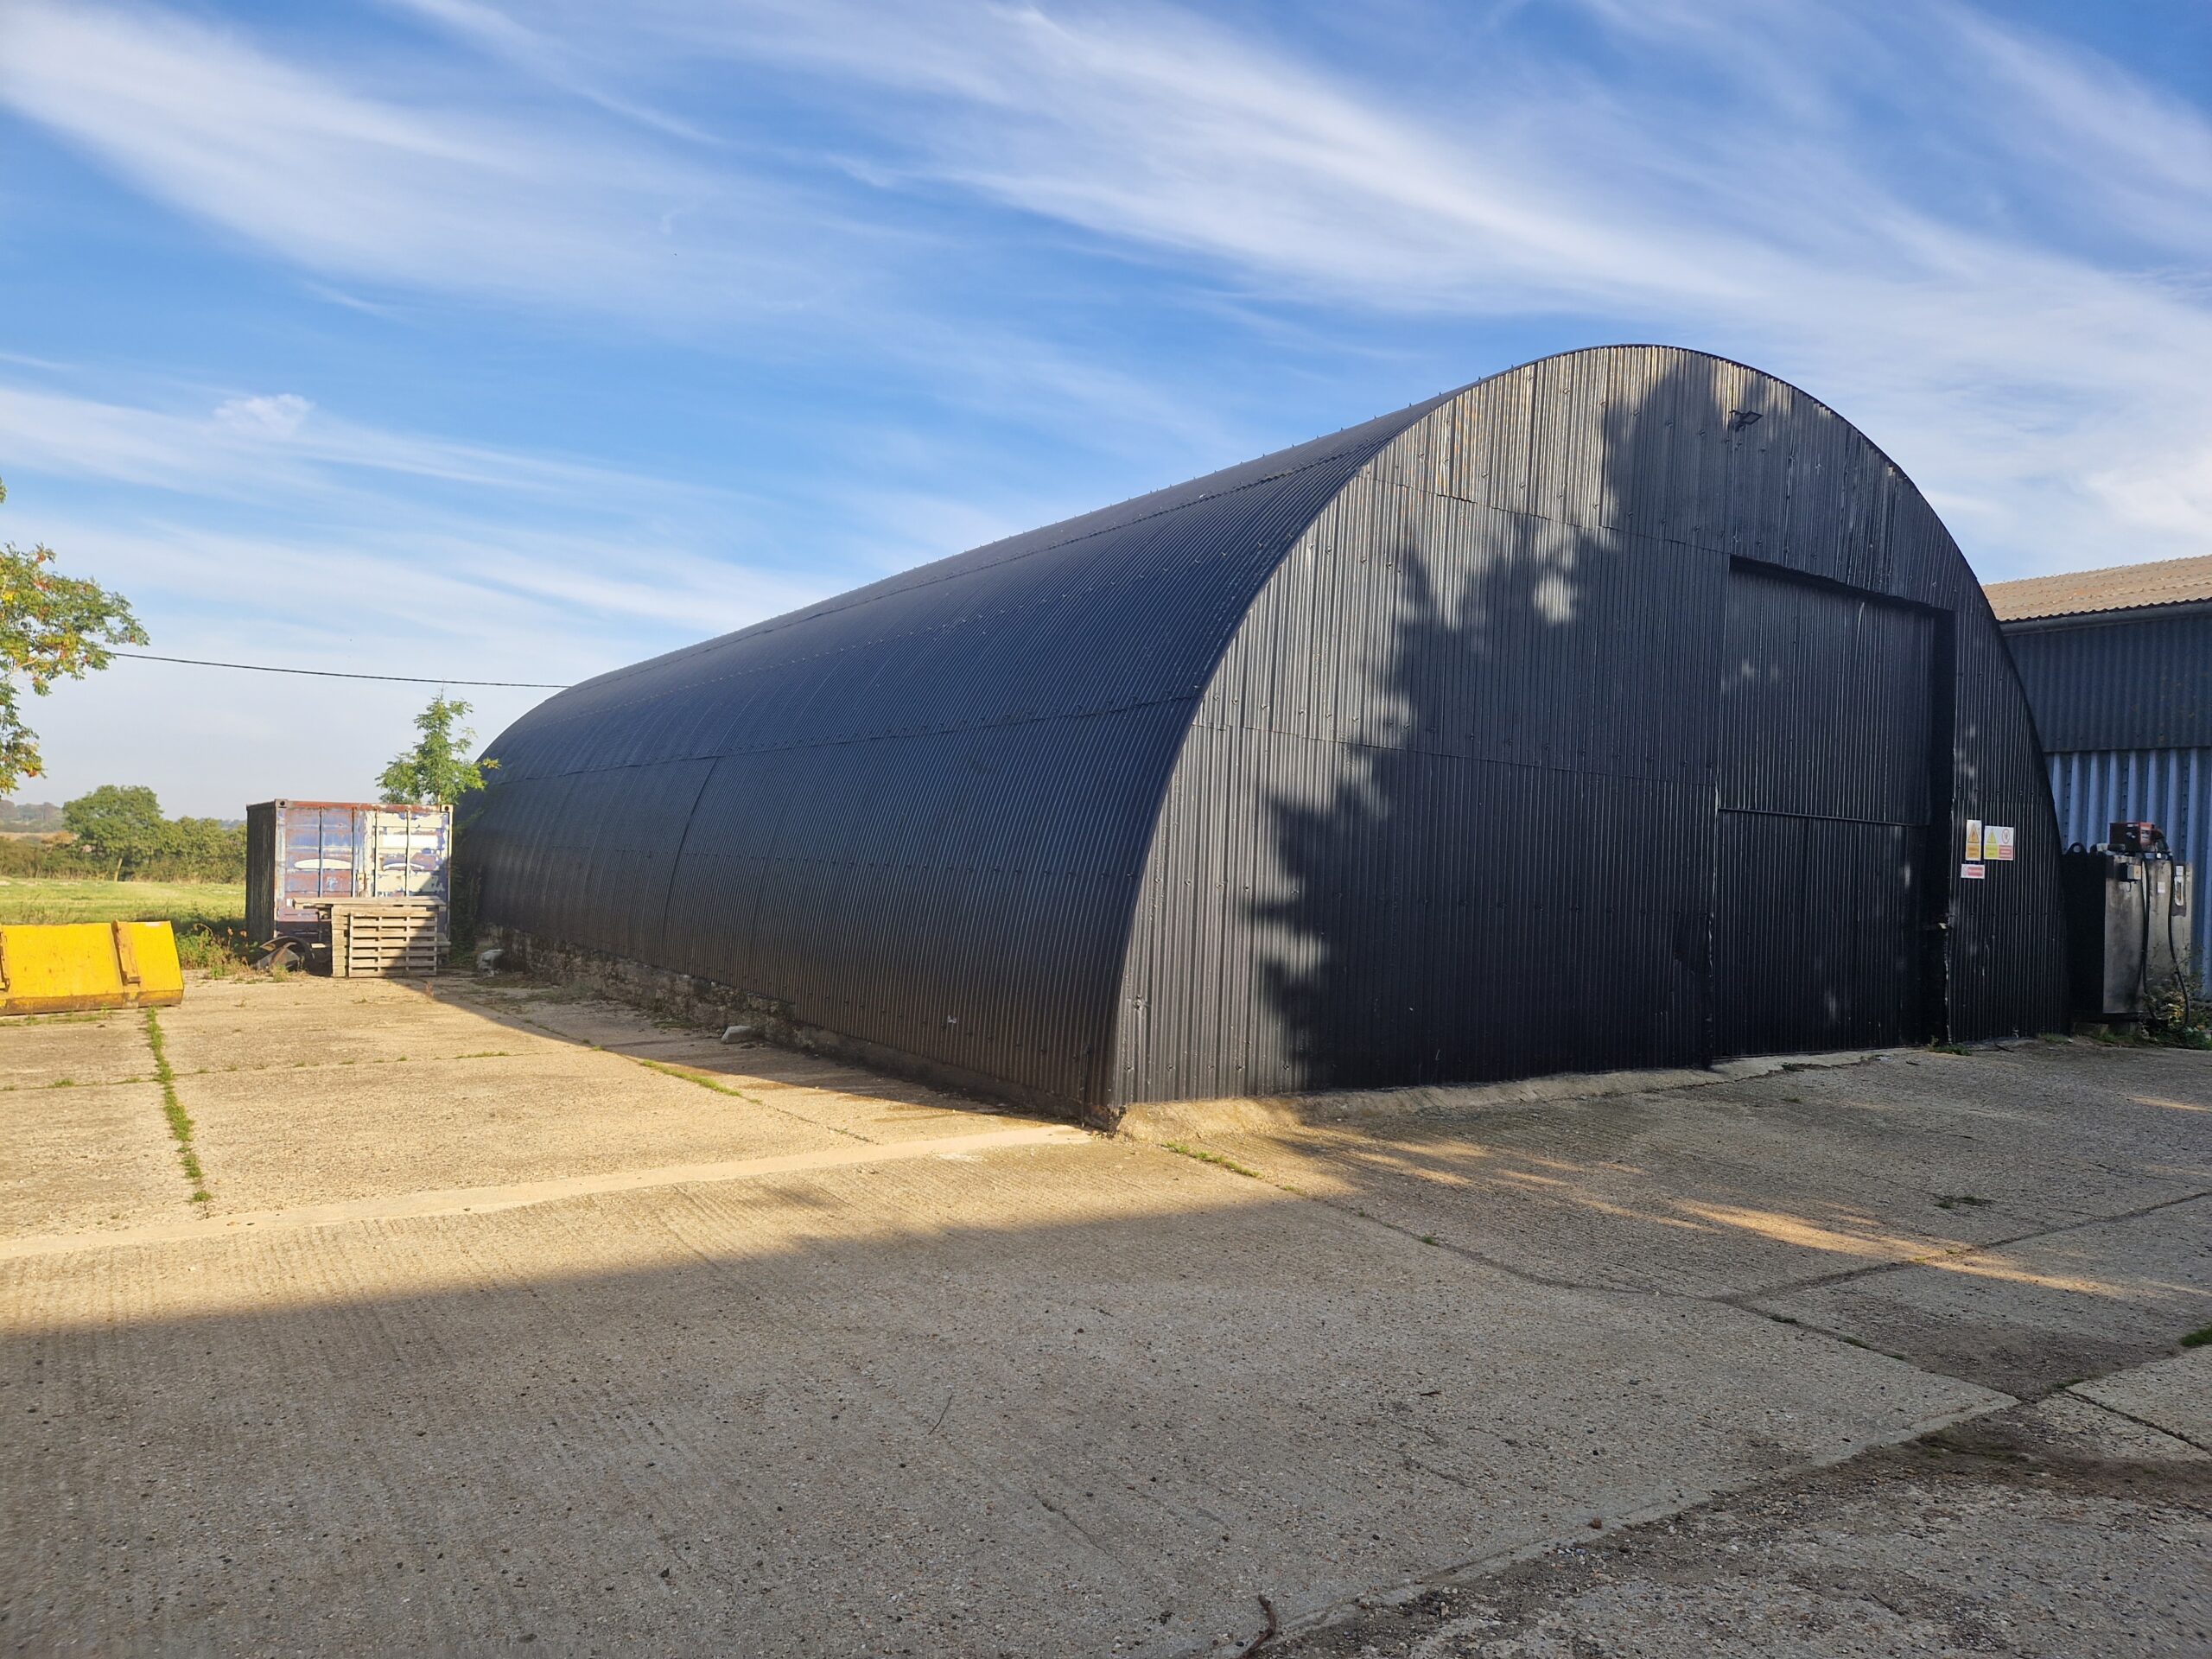 Warehouse/Workshop to Let at Great Chesterford, Saffron Waldon, Essex